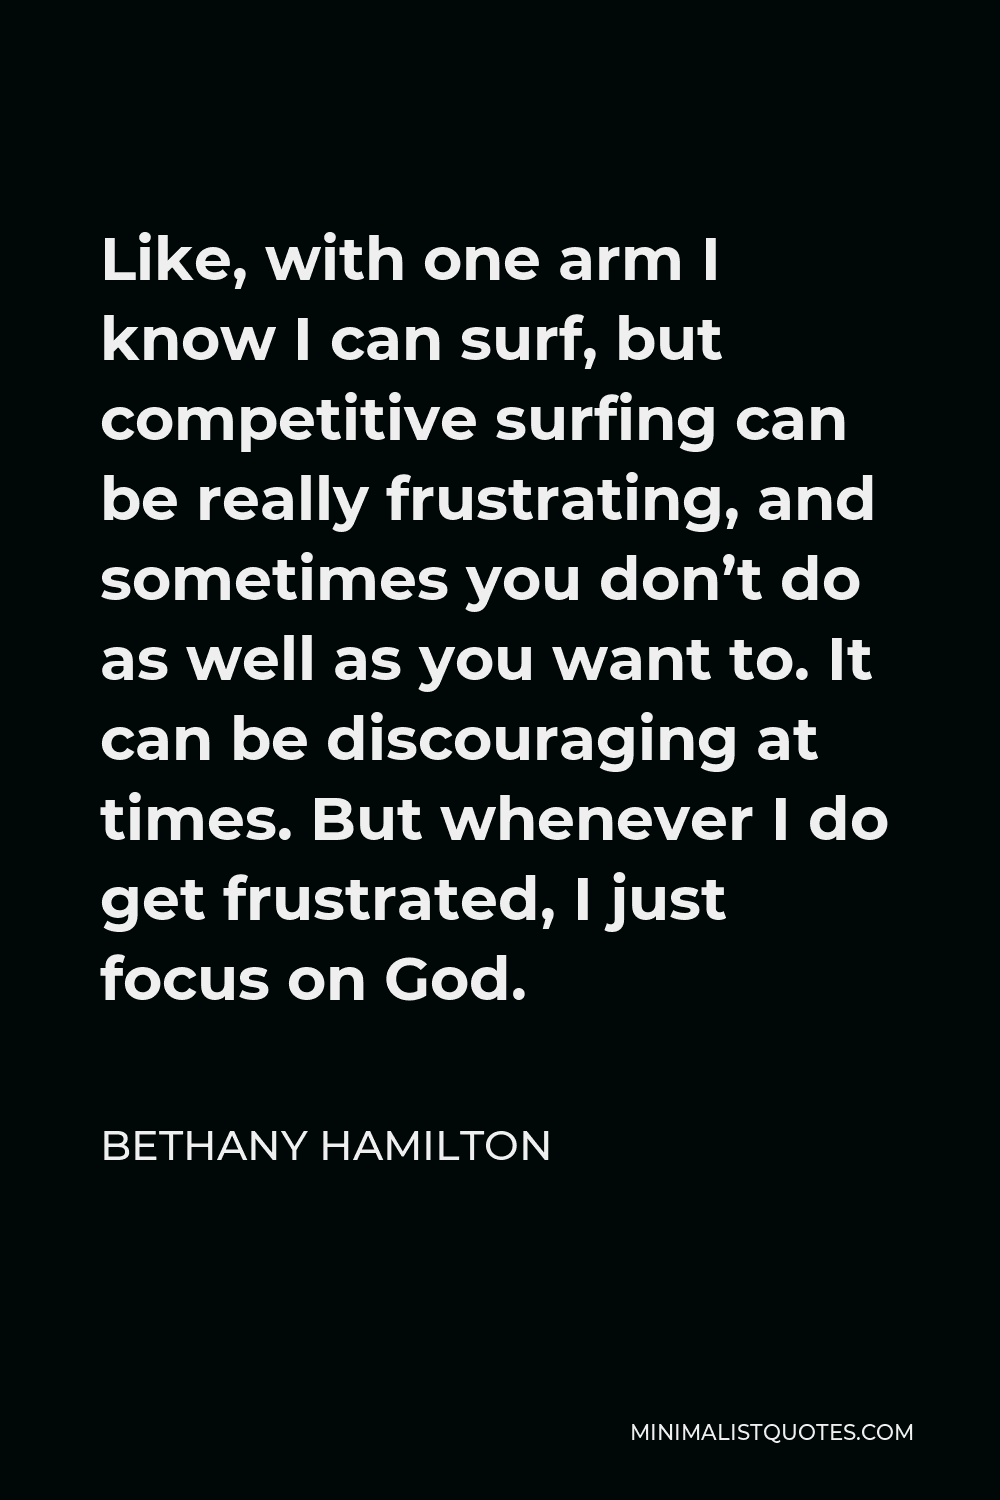 Bethany Hamilton Quote - Like, with one arm I know I can surf, but competitive surfing can be really frustrating, and sometimes you don’t do as well as you want to. It can be discouraging at times. But whenever I do get frustrated, I just focus on God.